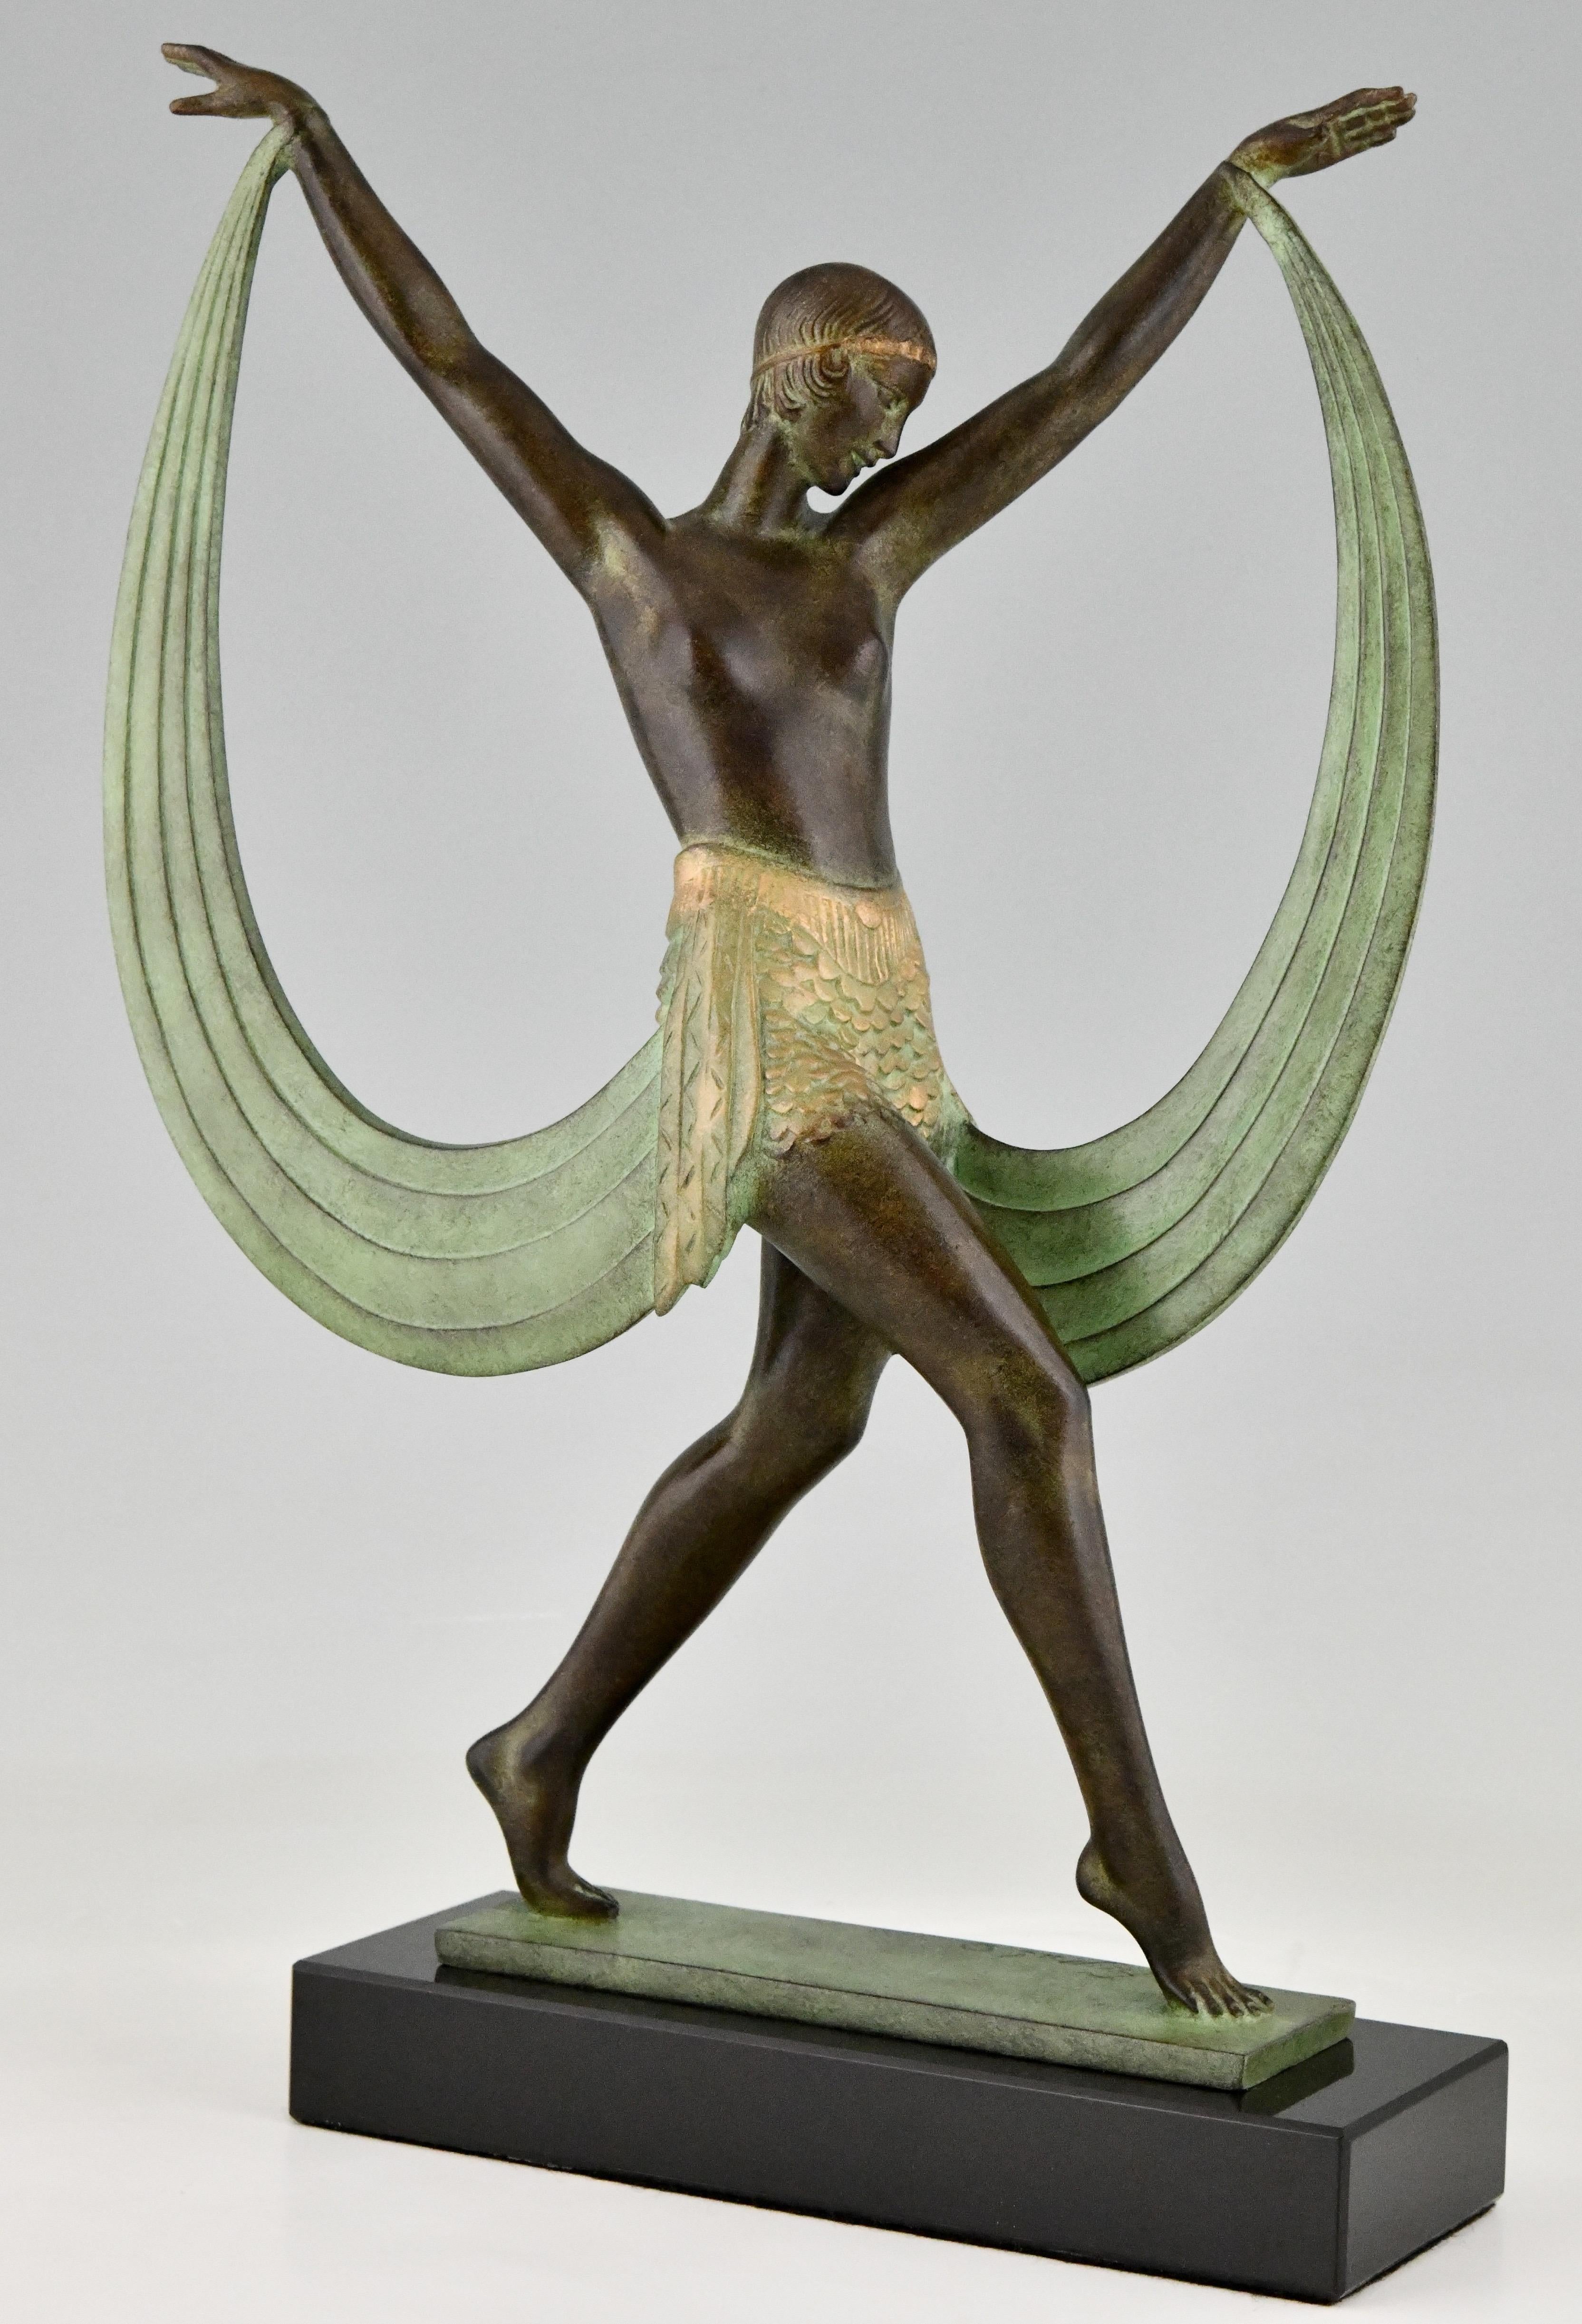 LYSIS Art Deco style sculpture of a dancer by Pierre Le Faguays. 
Signed Fayral. Pseudonym of Pierre Le Faguays.
With foundry seal. 
Design 1930. 
Posthumous contemporary cast at the Max Le Verrier foundry. 
This model is illustrated in:
Art Deco